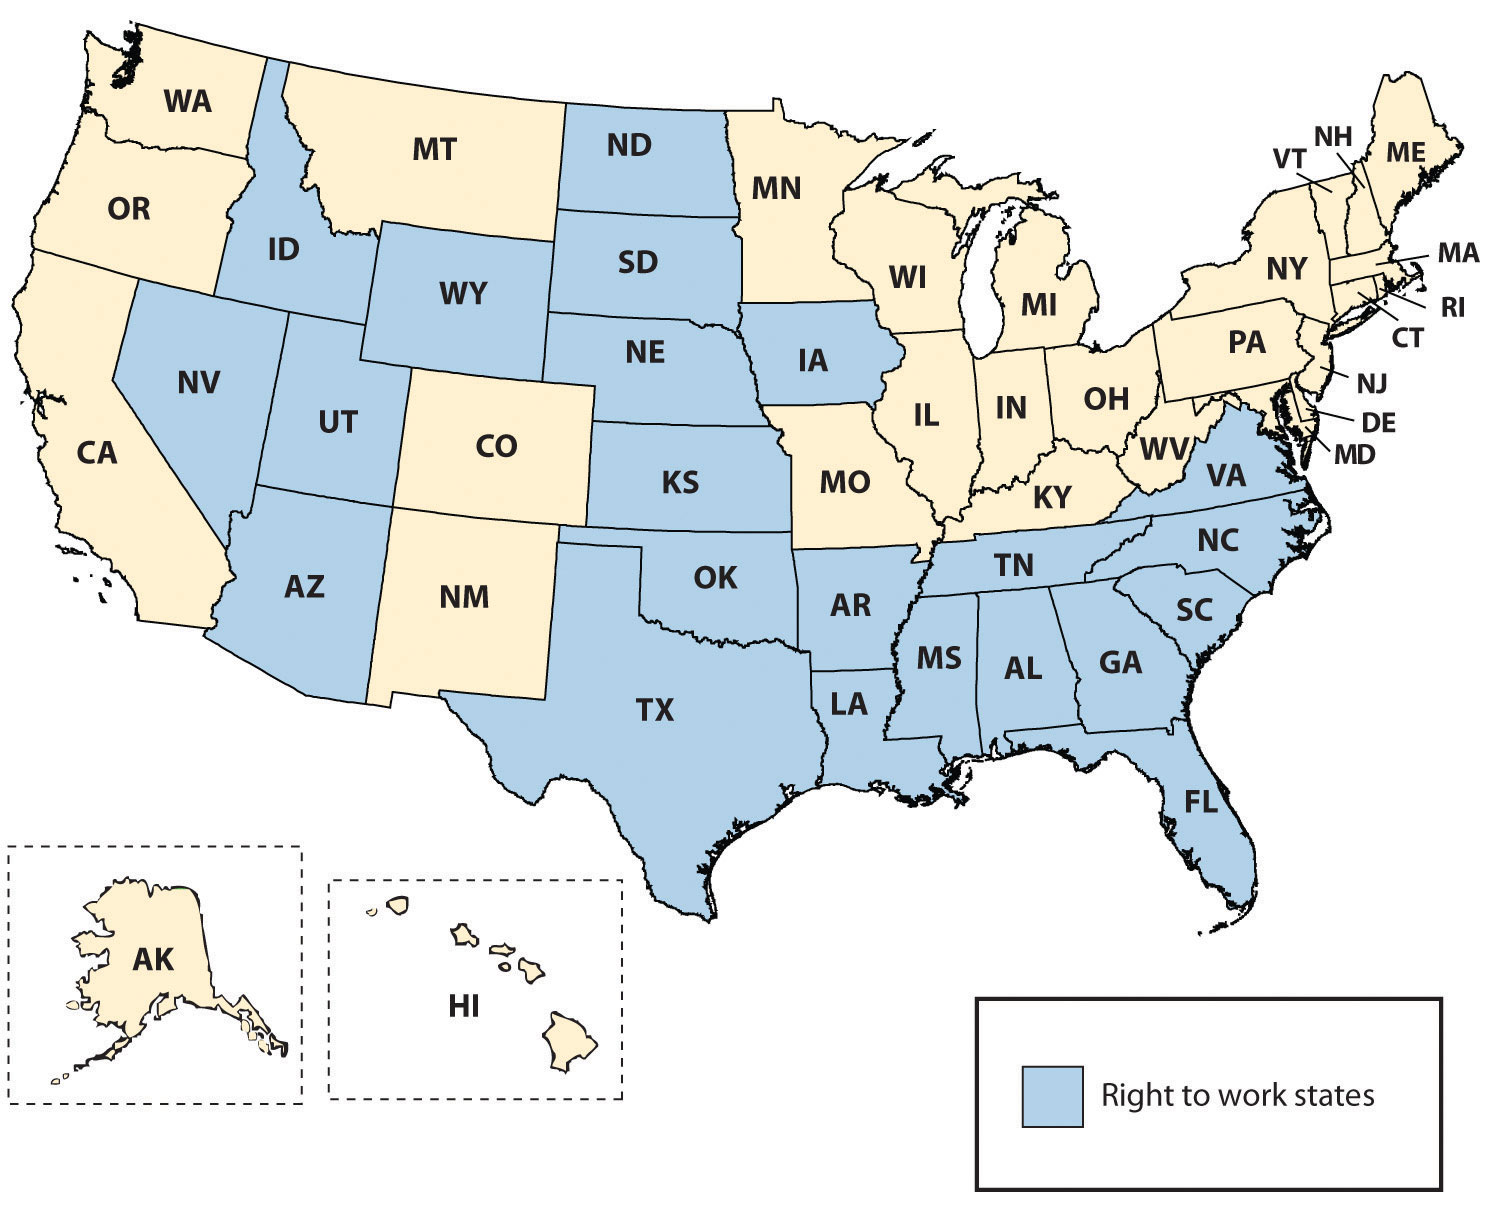 Map of Right to Work States